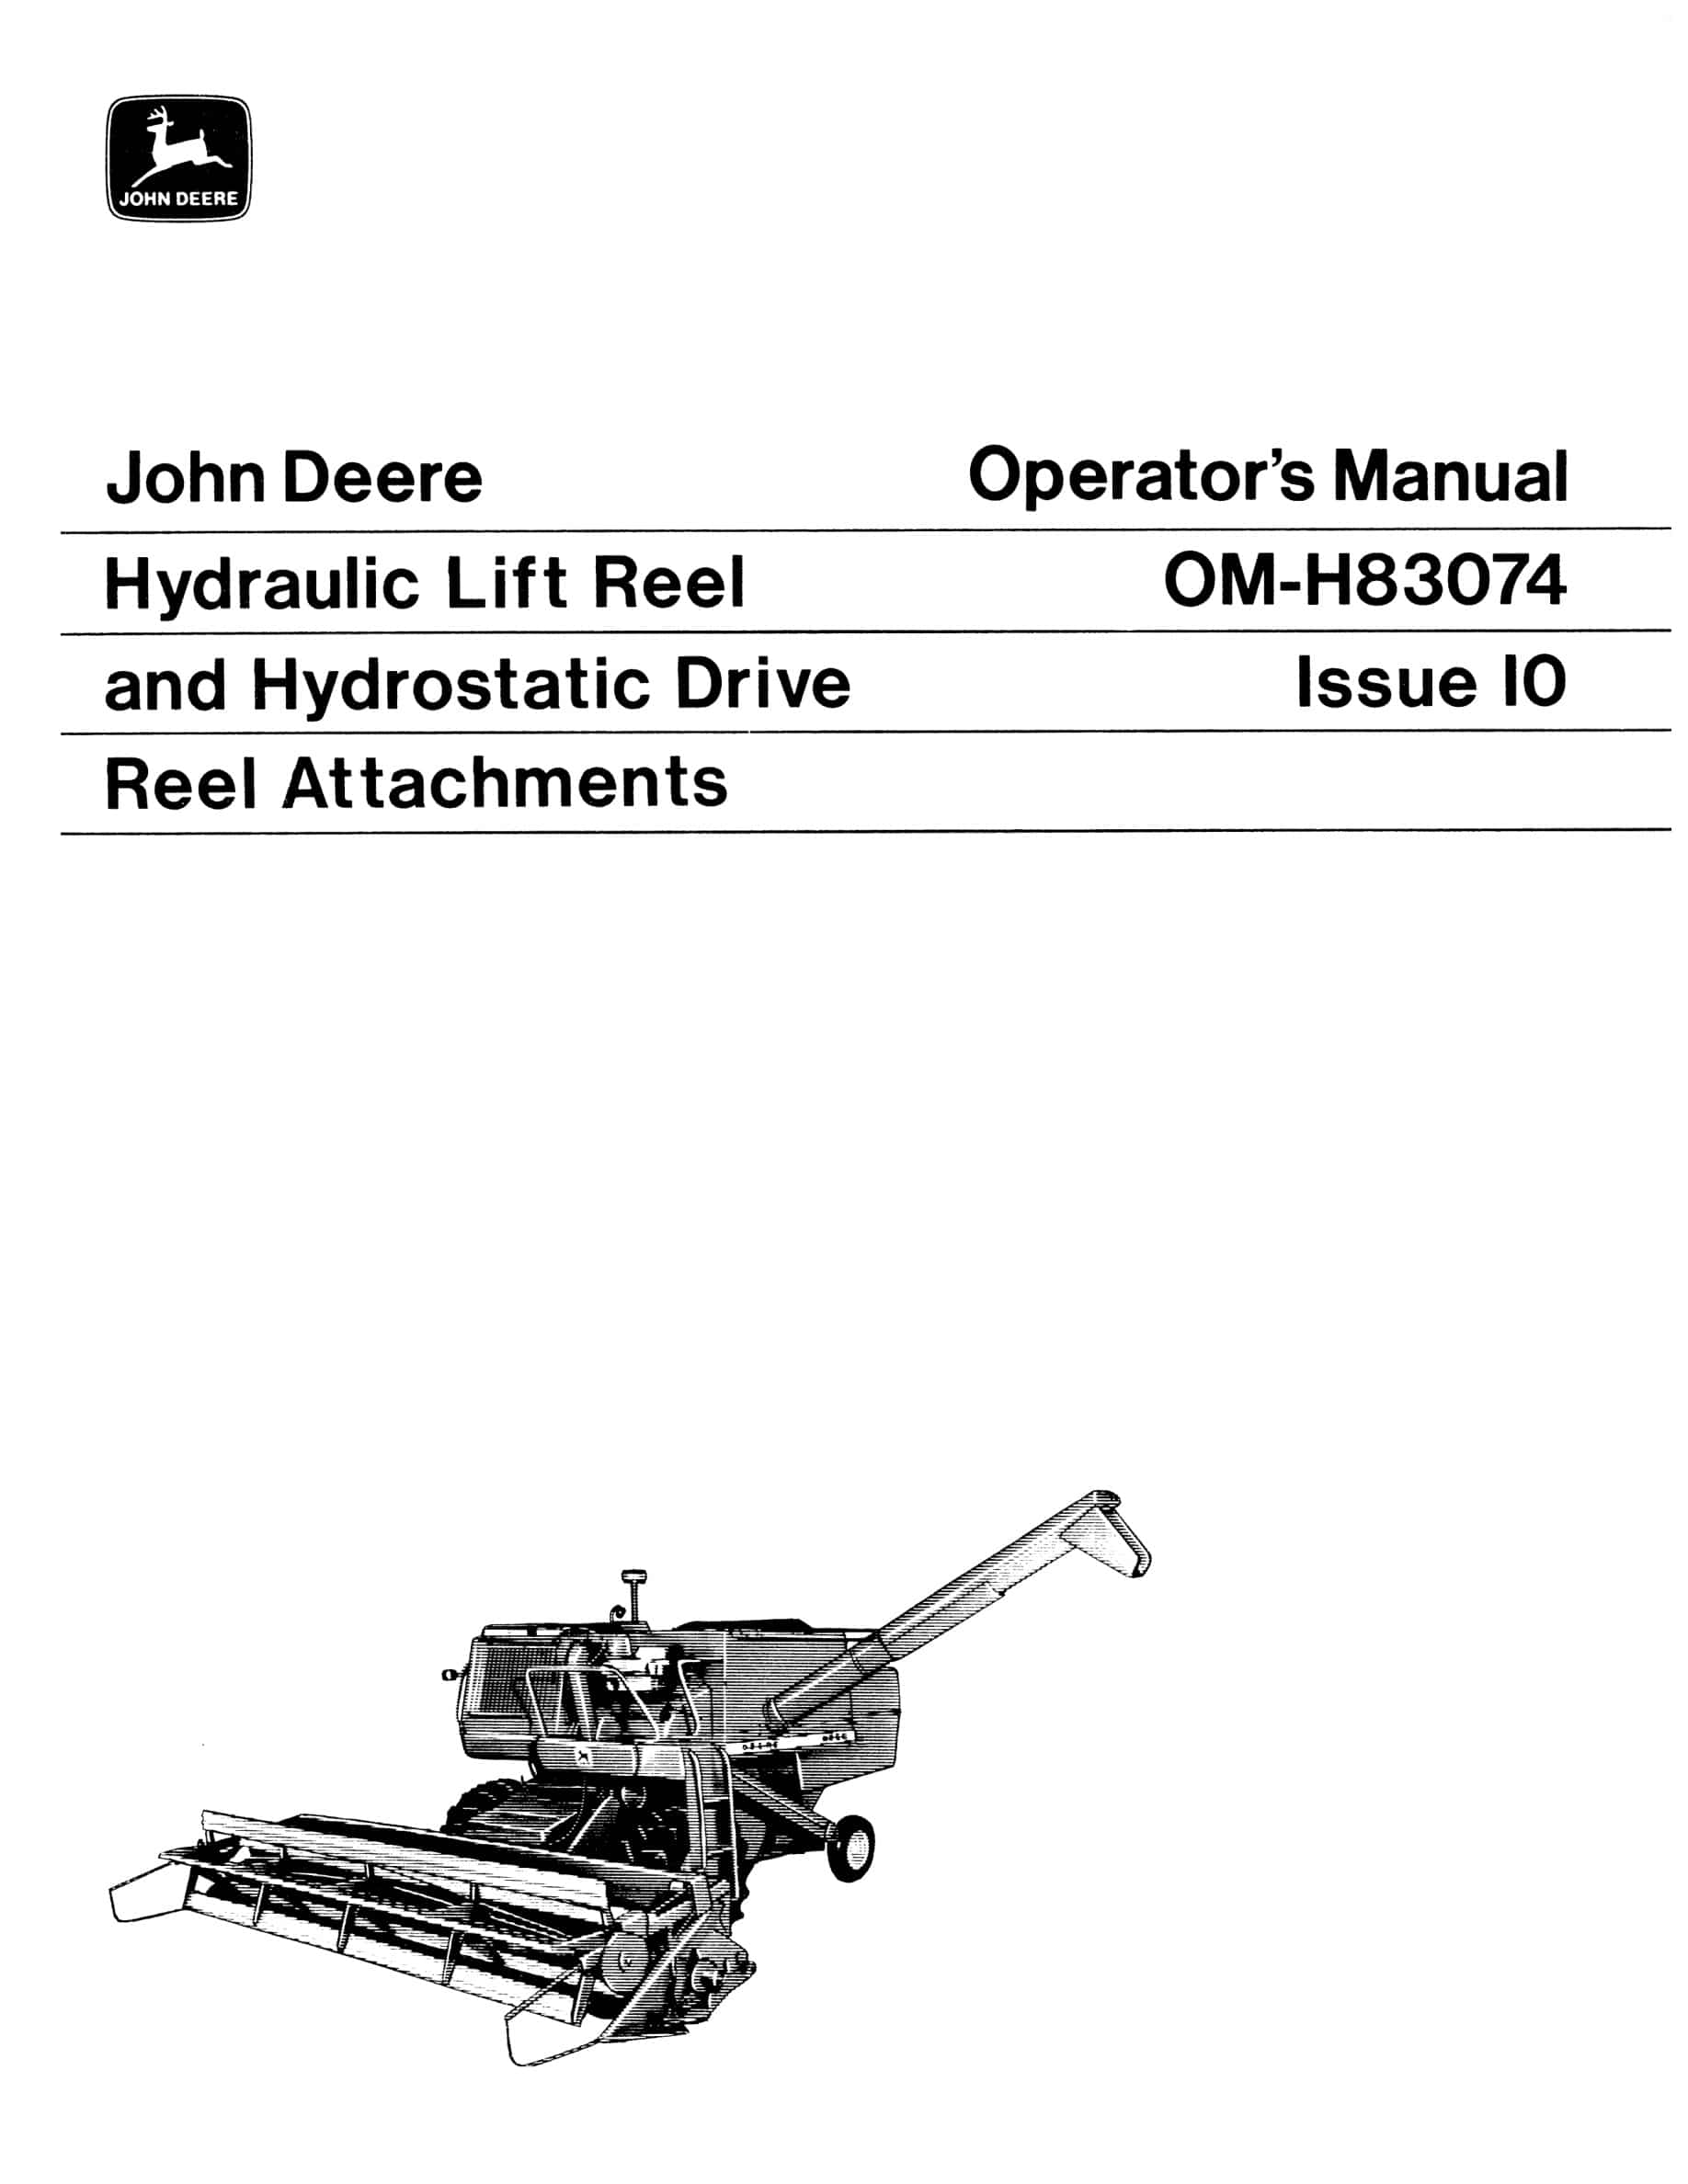 John Deere Hydraulic Lift Rell and hydrostatic Drive Rell Attachments Operator Manual OMH83074-1